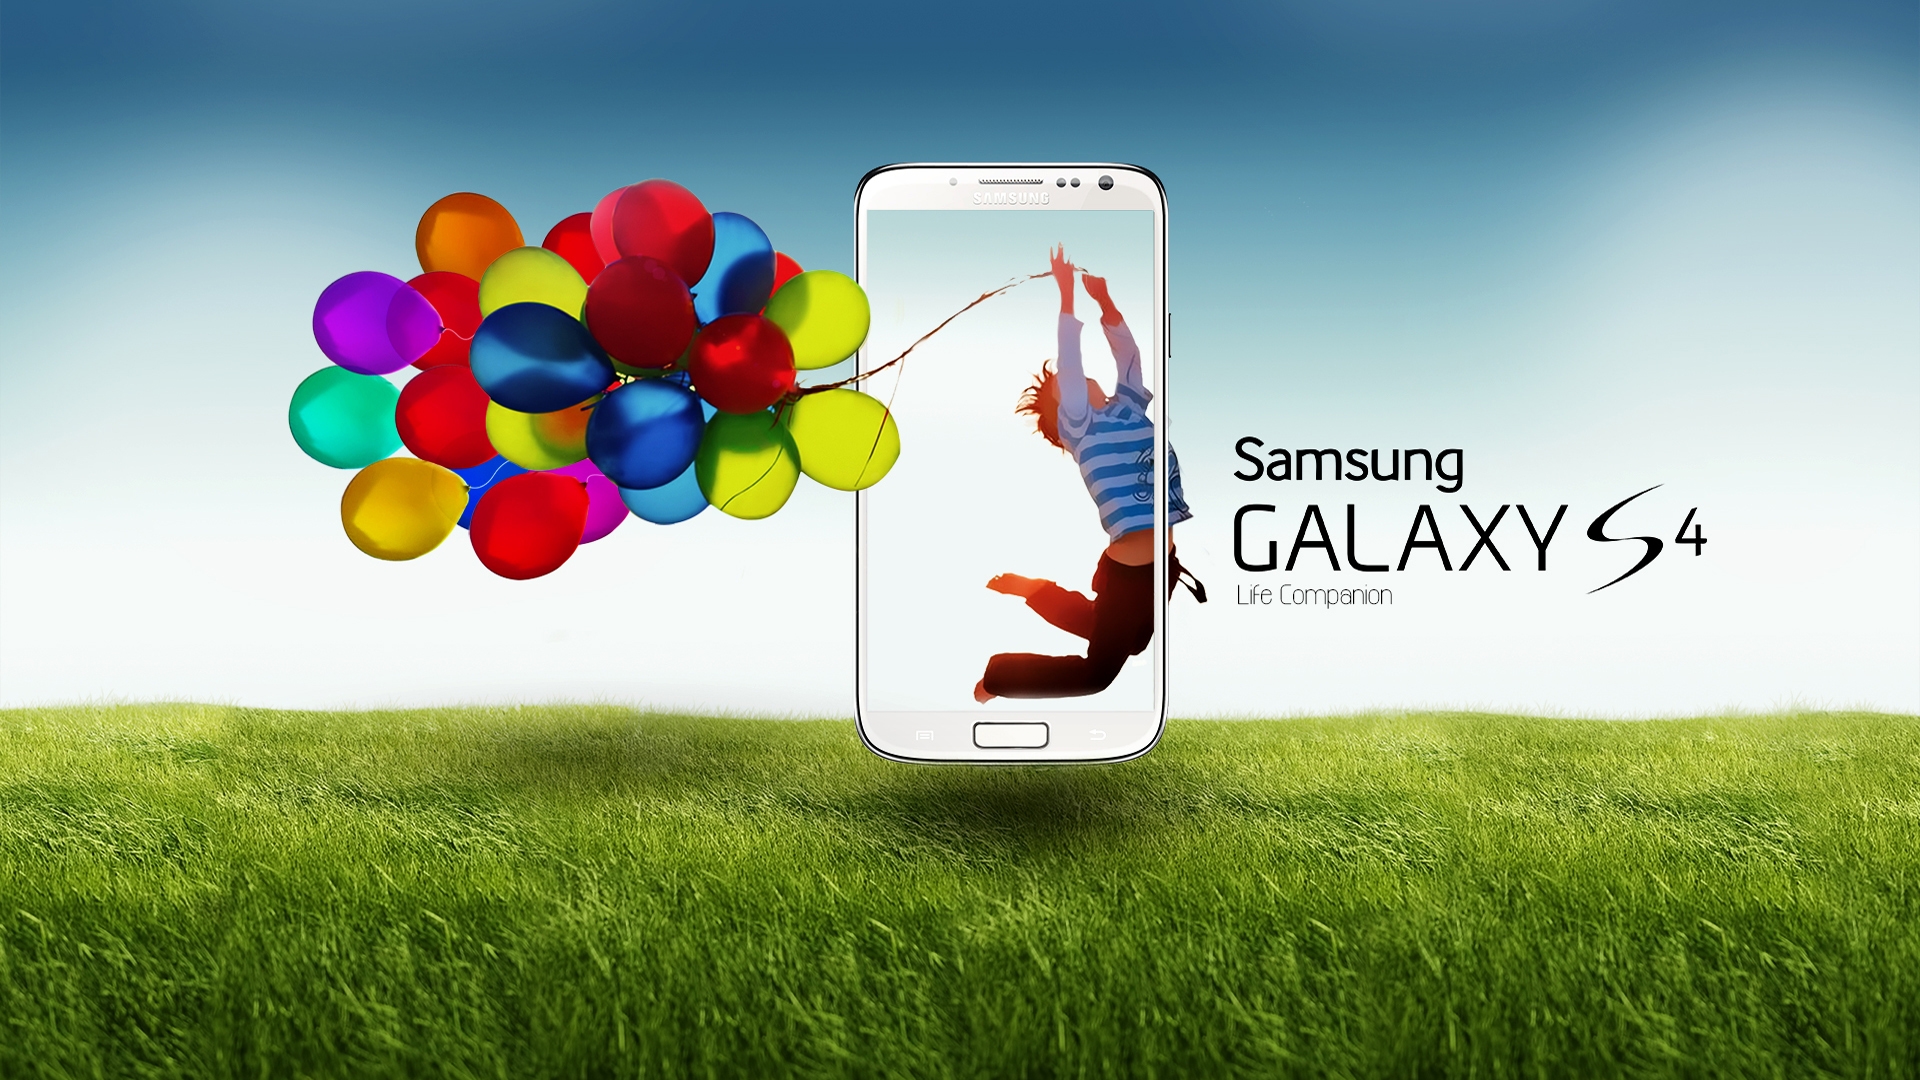 New Samsung Galaxy S4 for 1920 x 1080 HDTV 1080p resolution